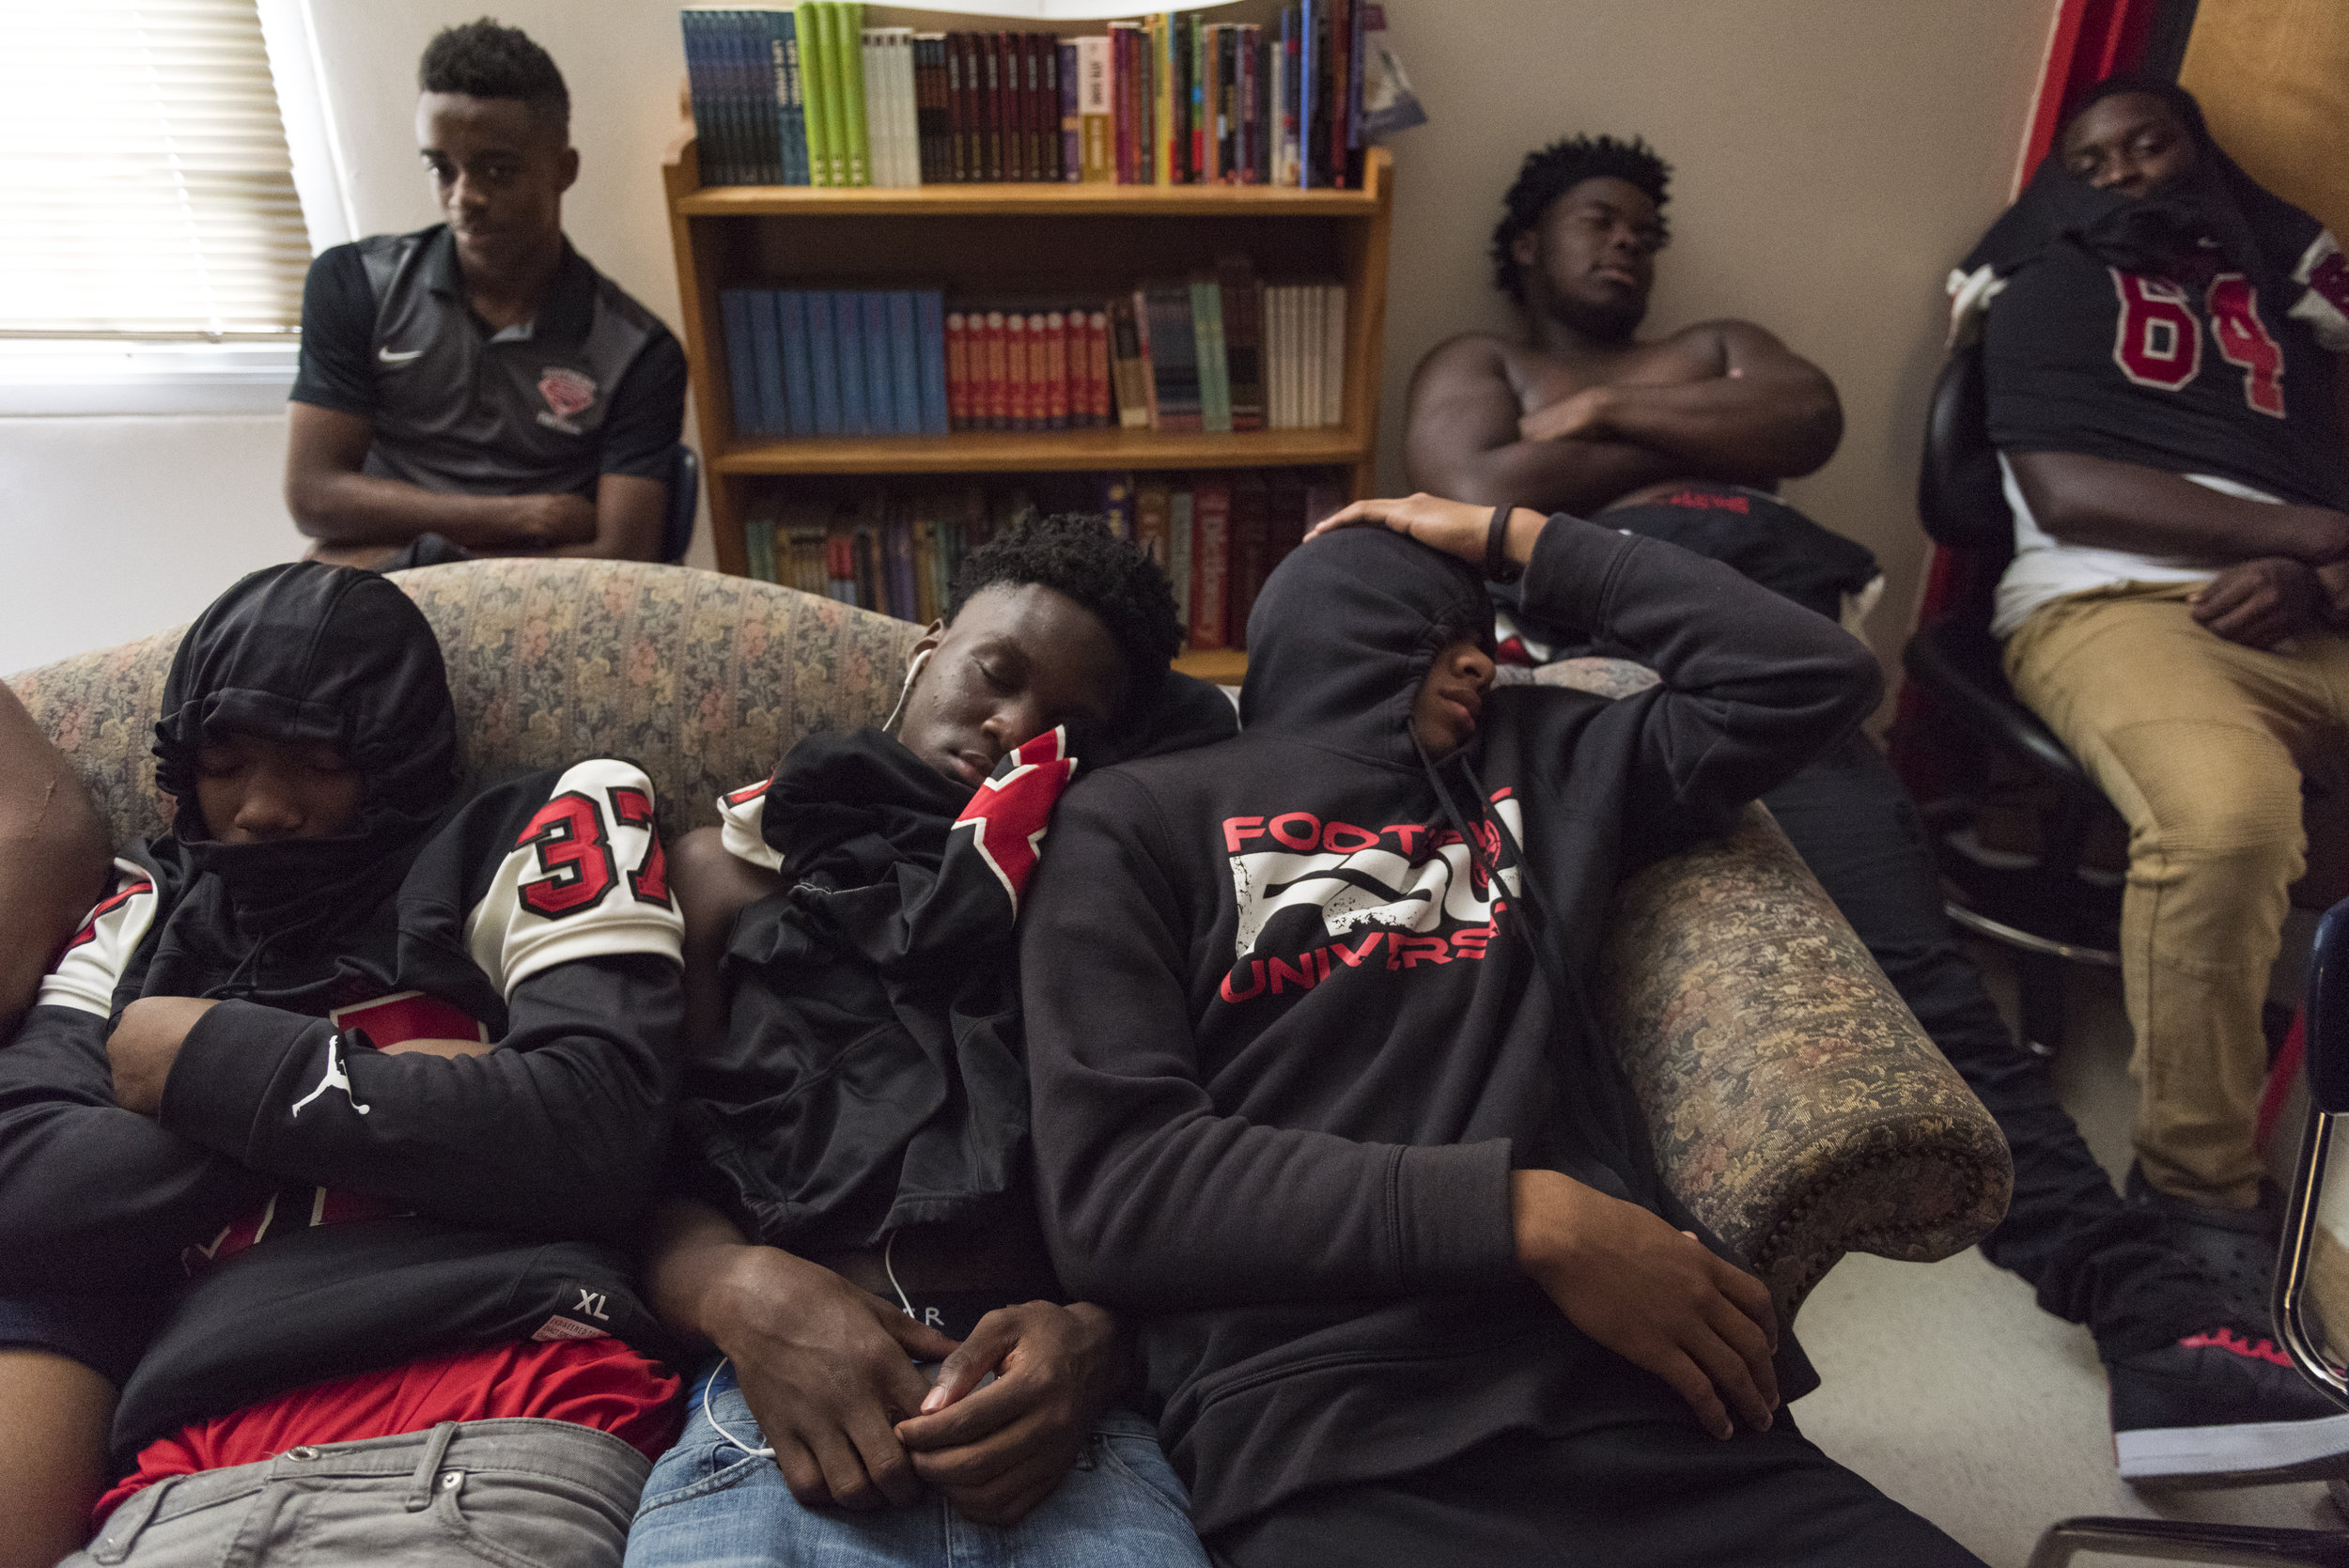  Southern Durham players take a quick nap before their game. During home game days, players usually have a team meal and then hangout in head coach Robinson's room before the game. 